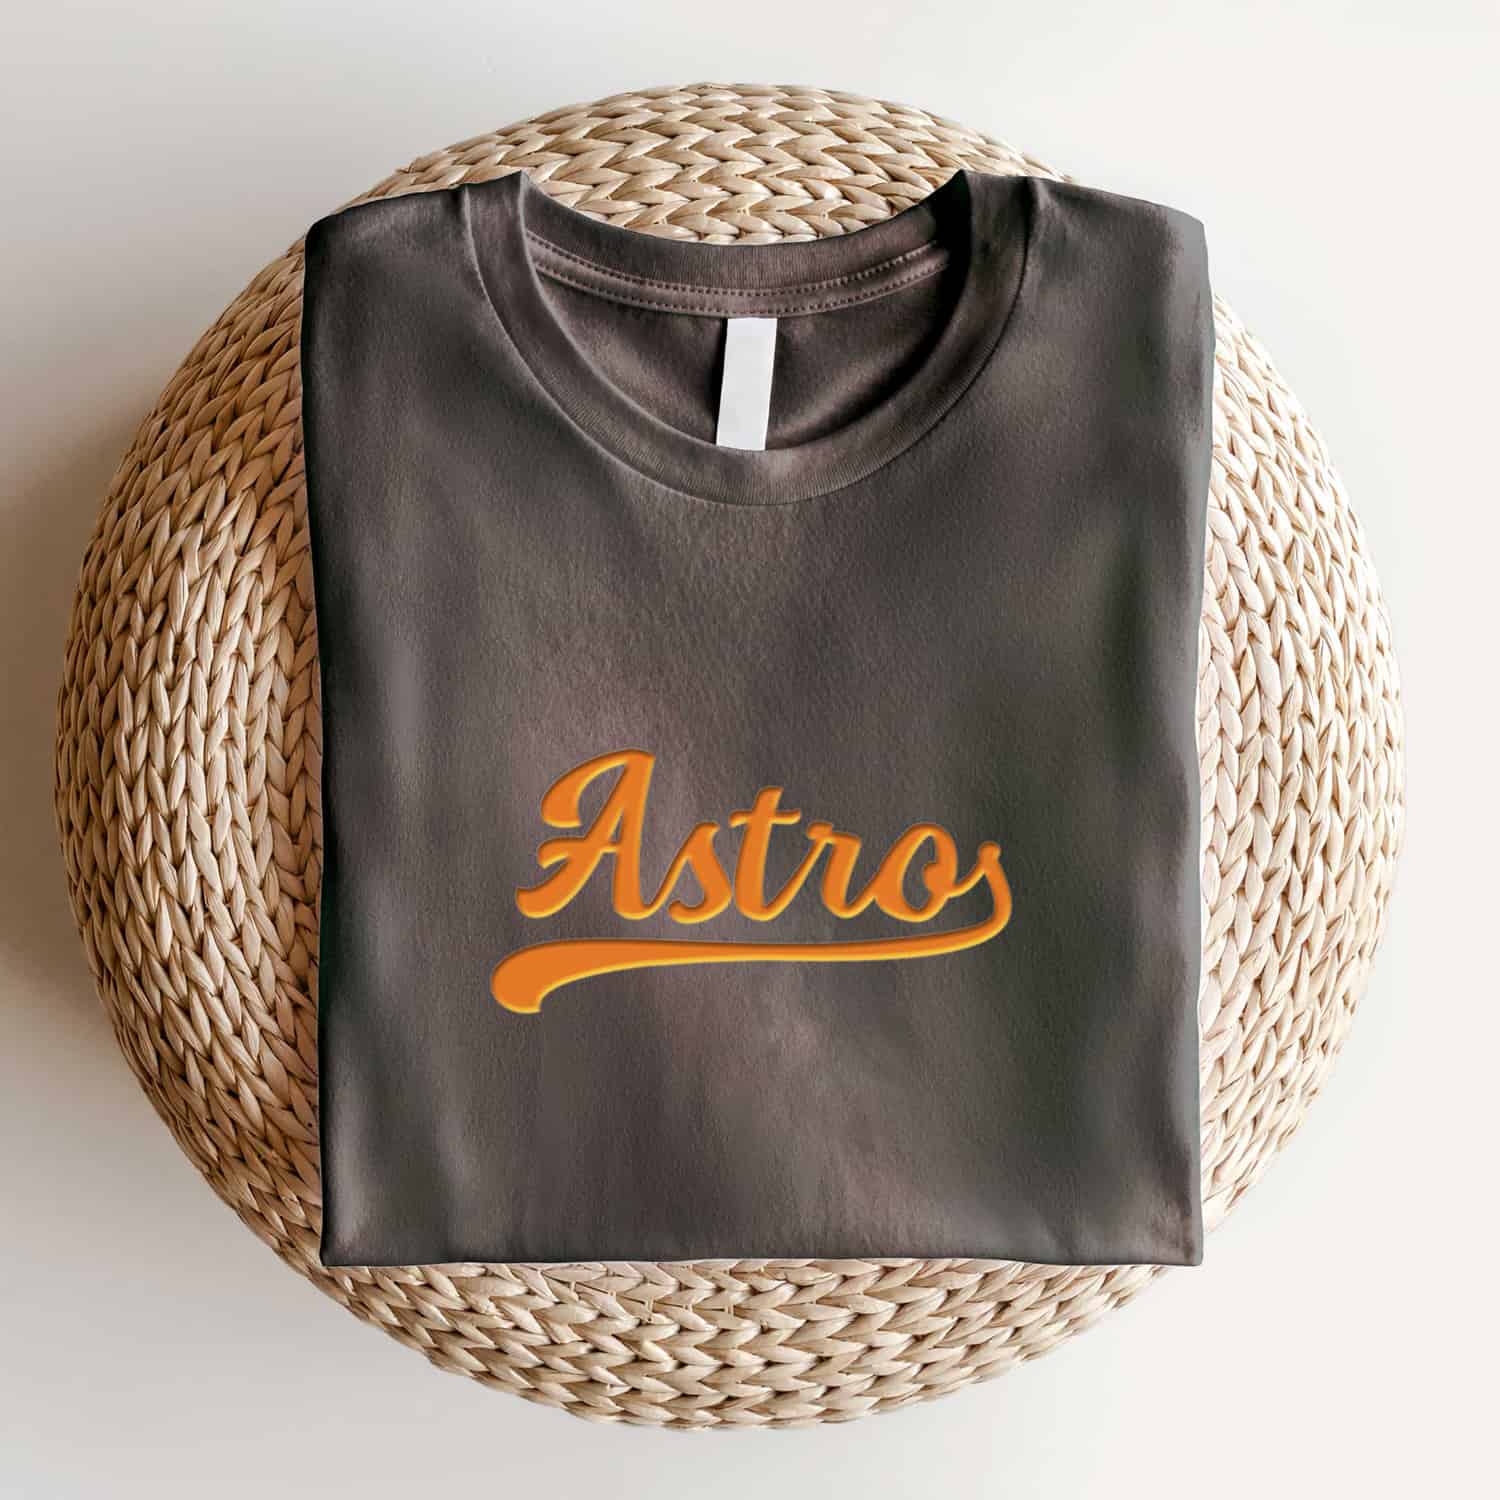 Astros Embroidered Shirt, Gifts for Astros Fans, Astros Houston